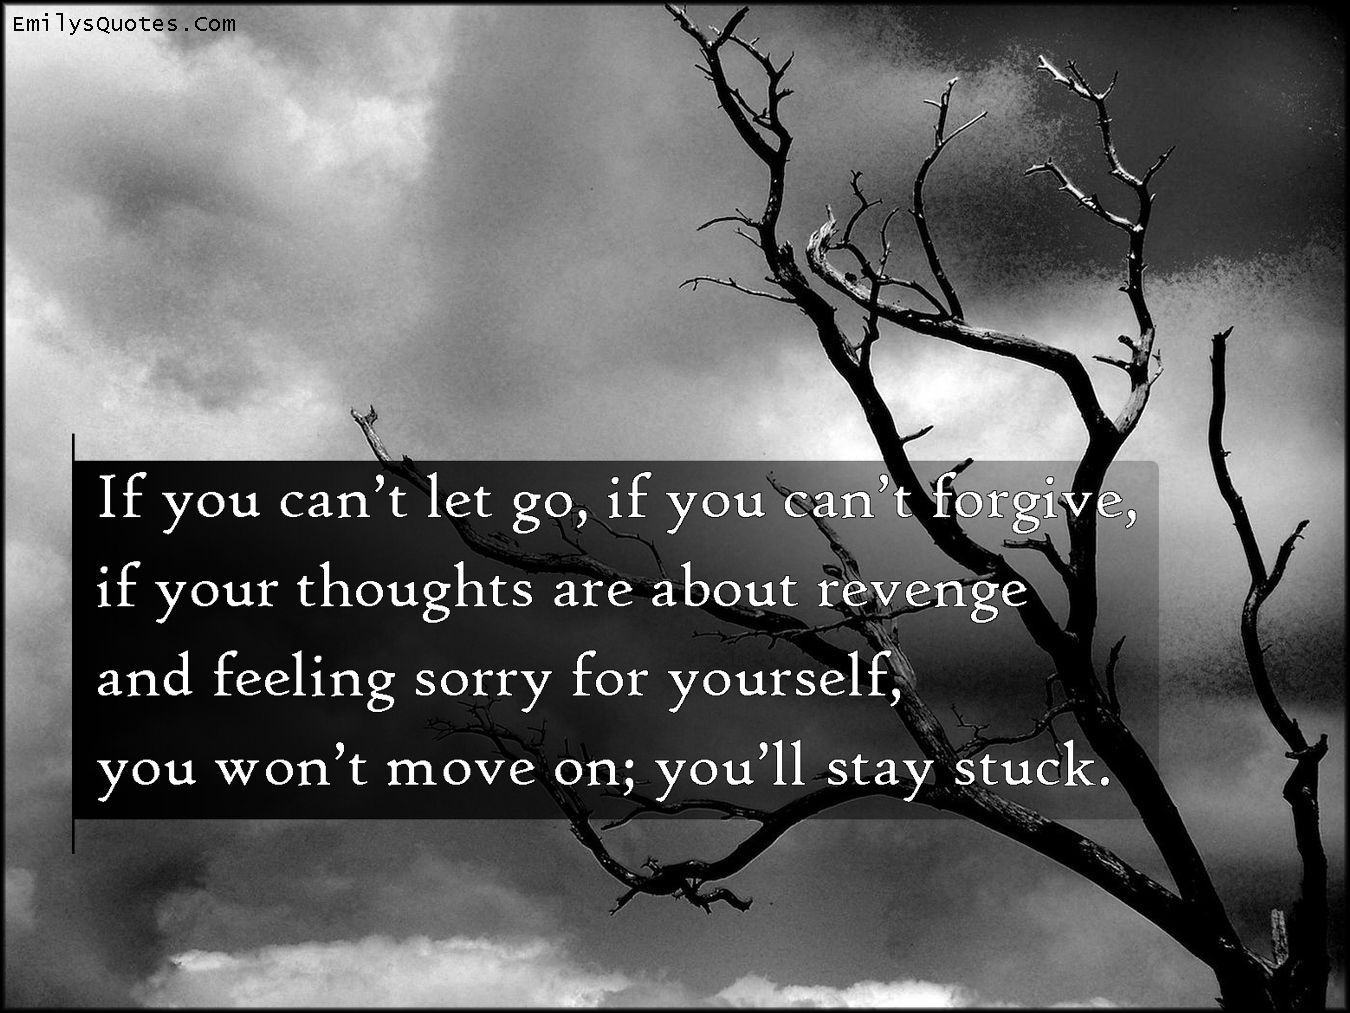 If you can’t let go, if you can’t forgive, if your thoughts are about revenge and feeling sorry for yourself, you won’t move on; you’ll stay stuck